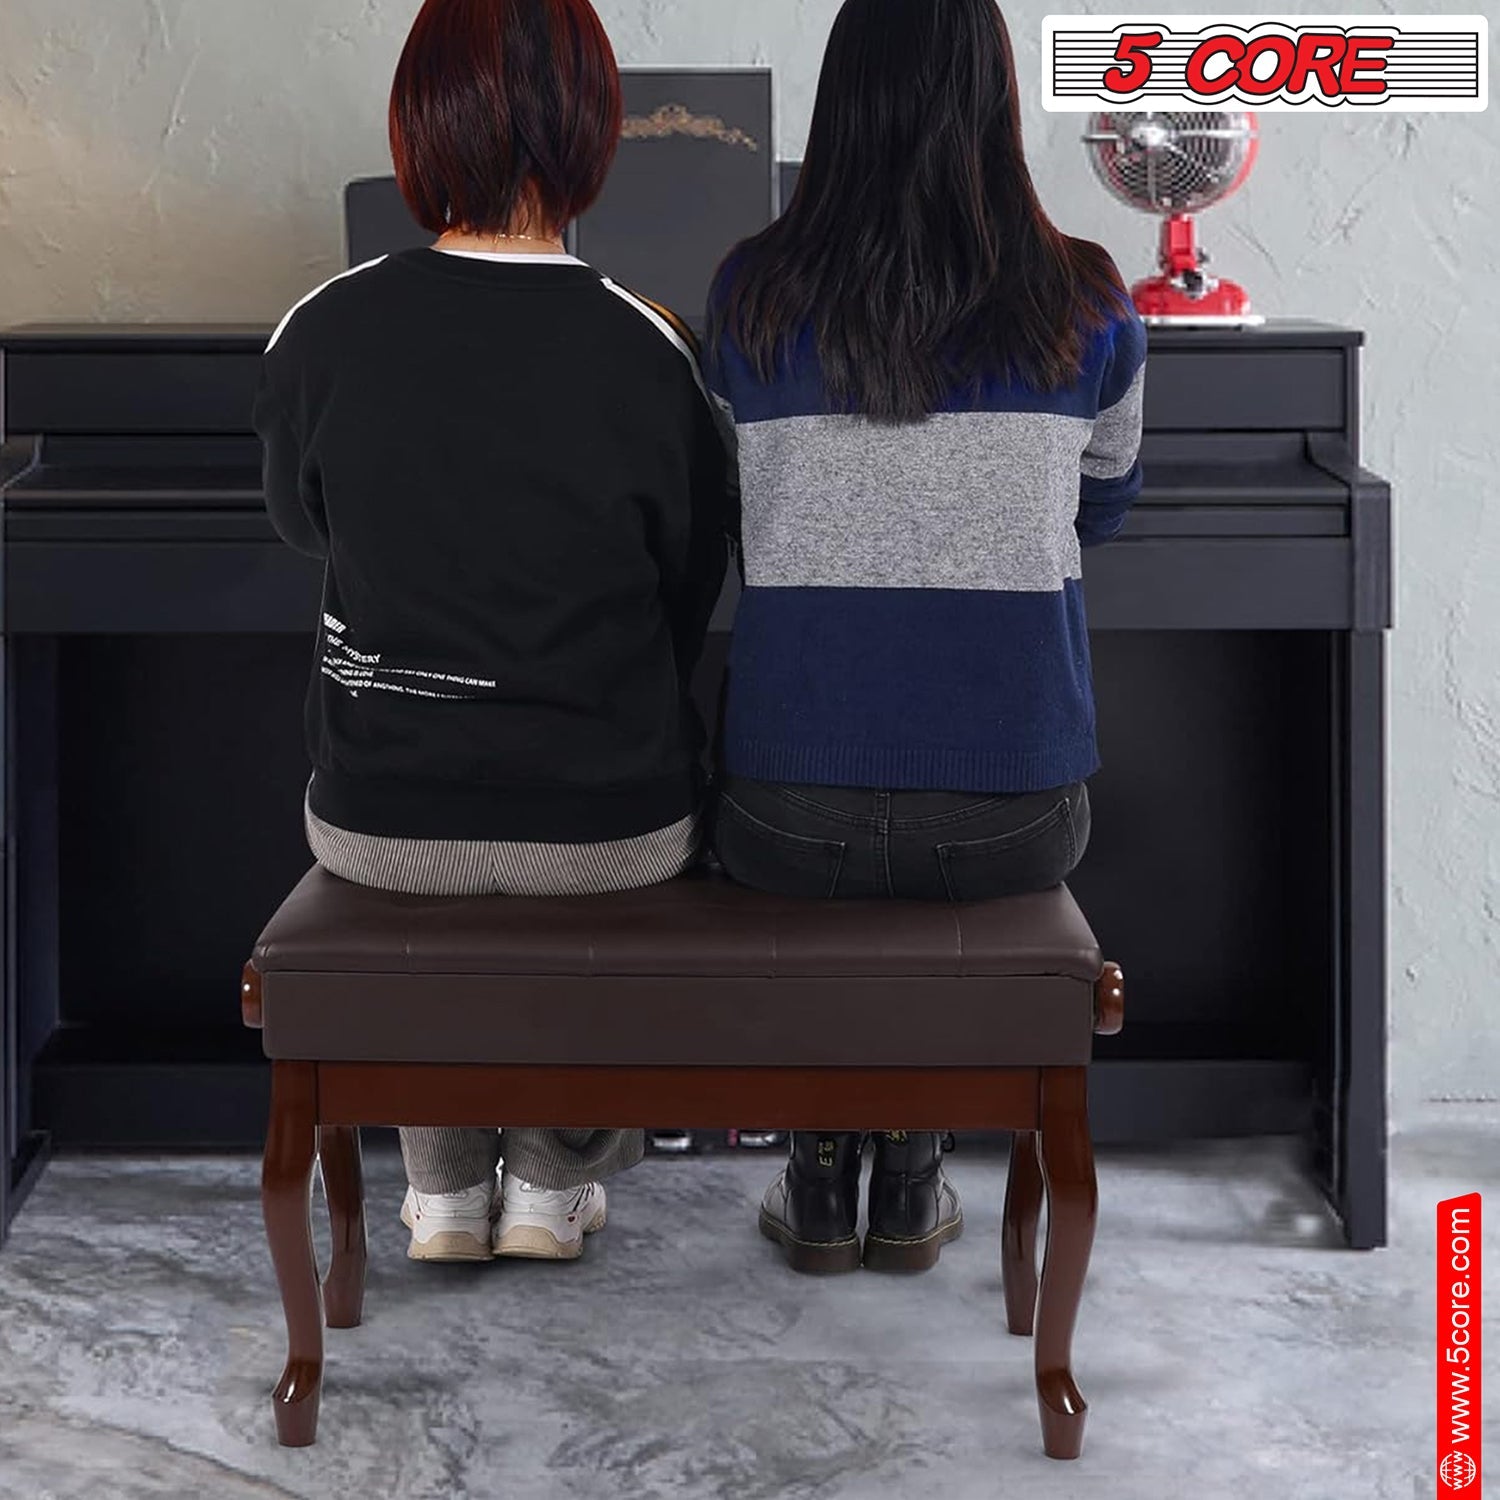 5 Core Piano Bench Wooden Height Adjustable Stool Heavy Duty Keyboard Seat with Storage